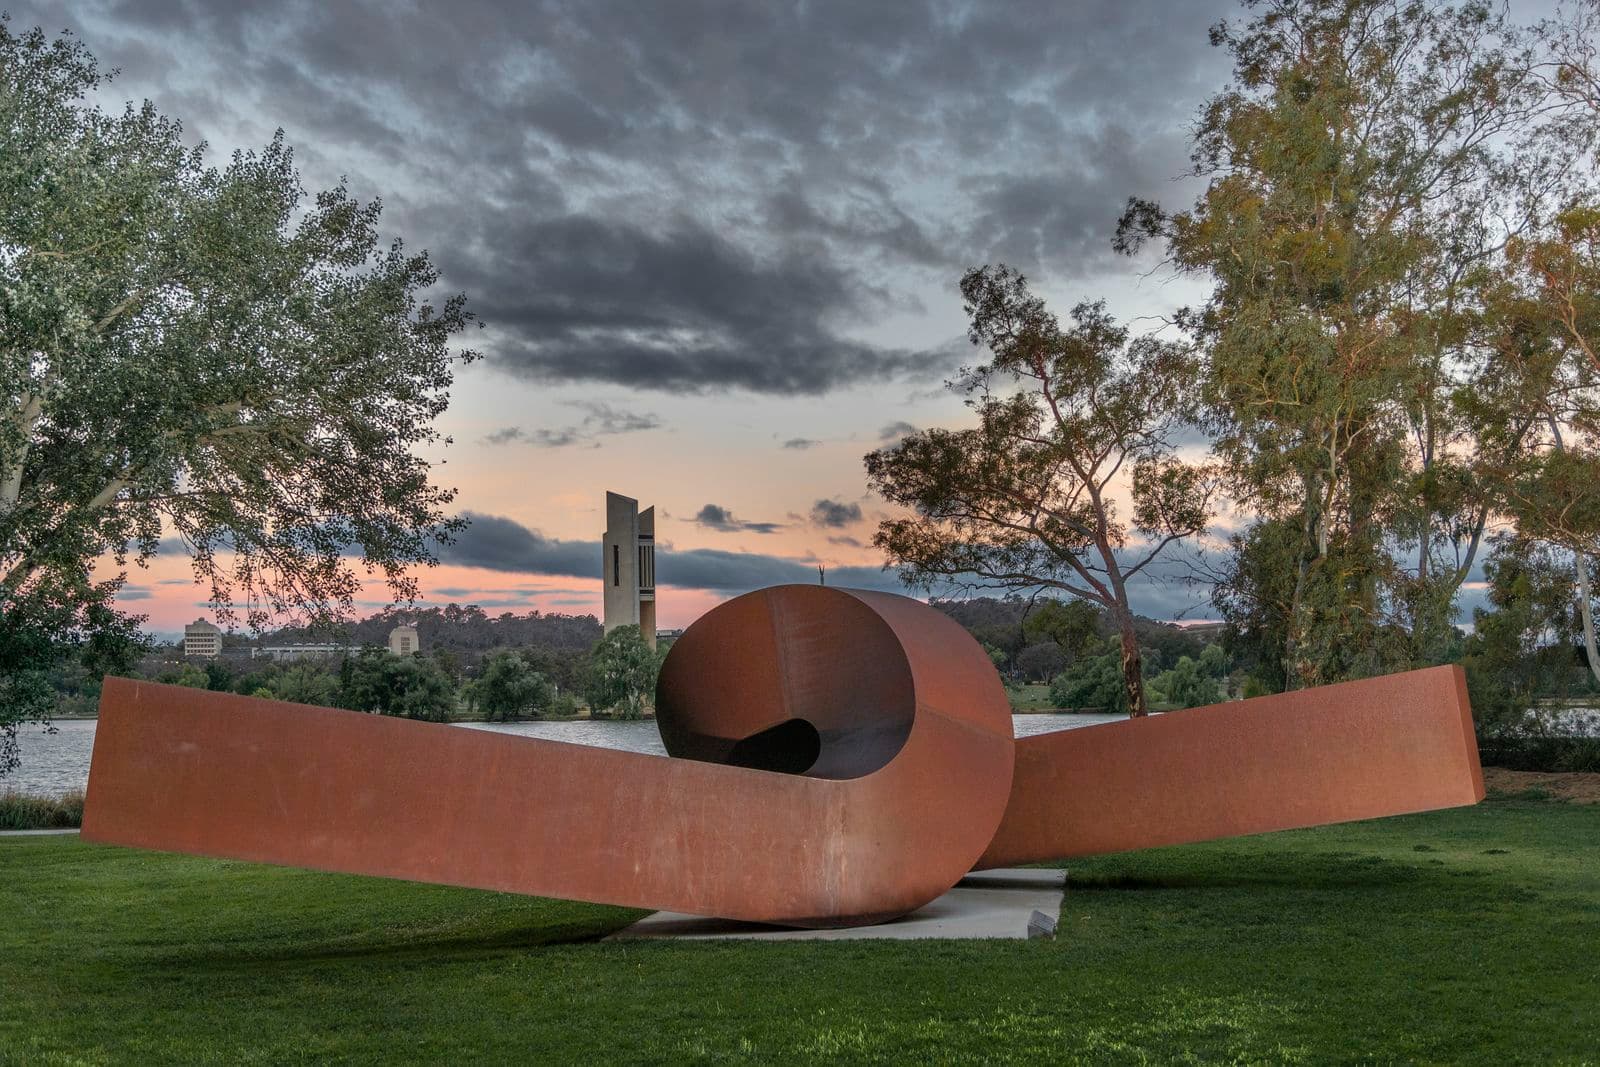 Photograph of sculpture garden with Virginia by Clement Meadmore in foreground and lake in background